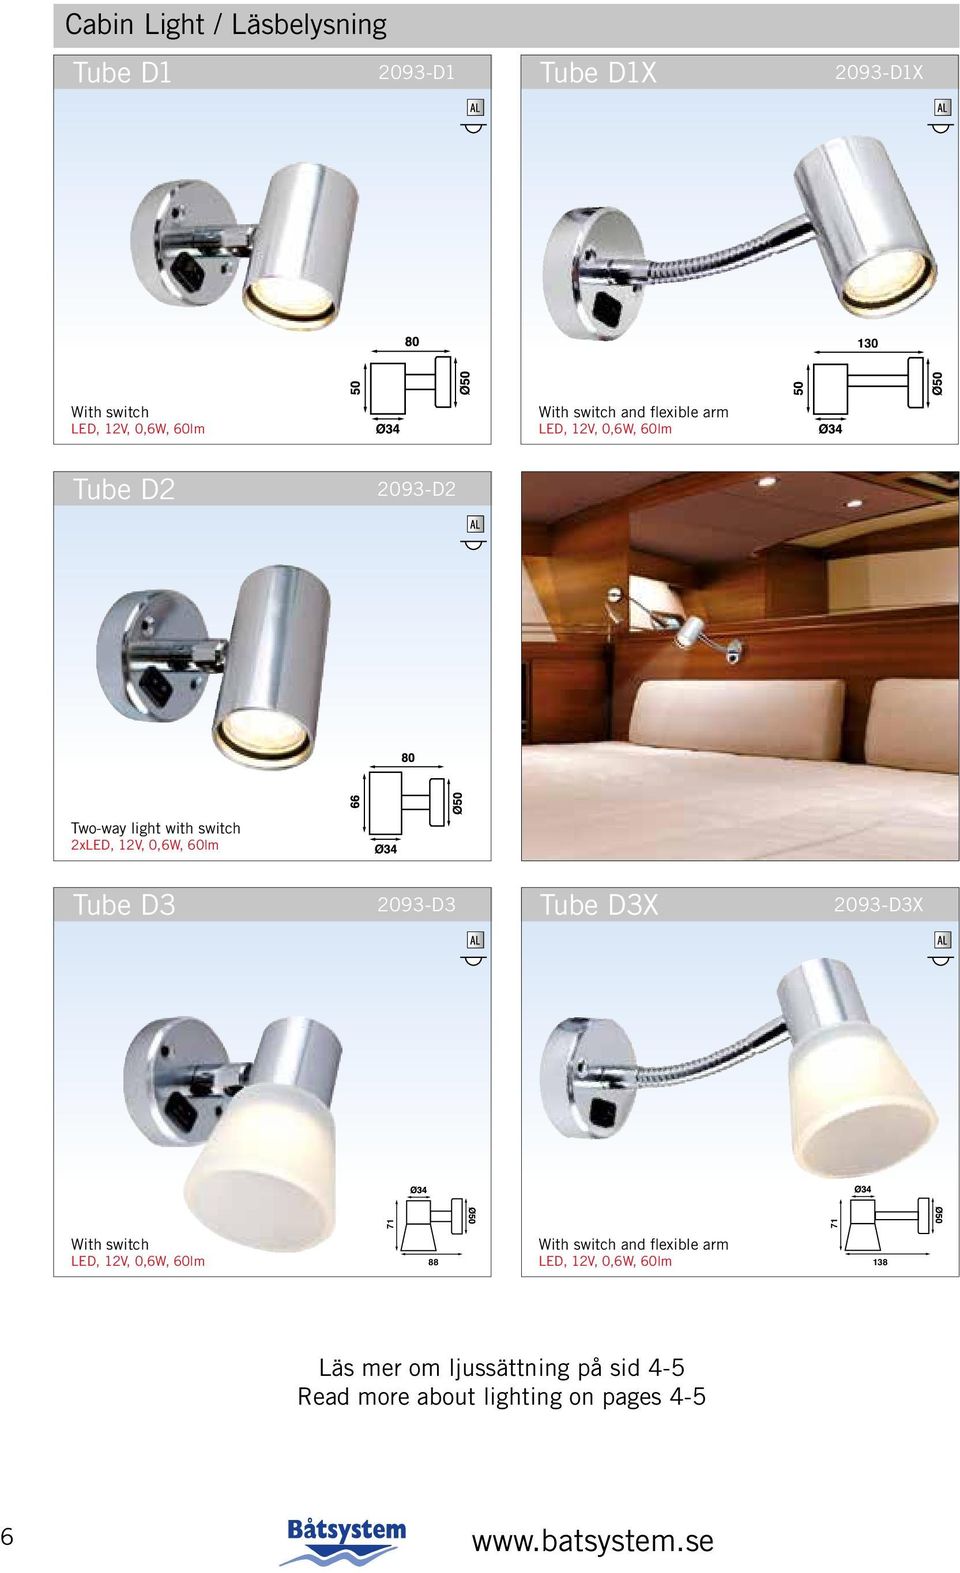 Tube D3 2093-D3 Tube D3X 2093-D3X 71 71 With switch LED, 12V, 0,6W, lm 88 With switch and flexible arm